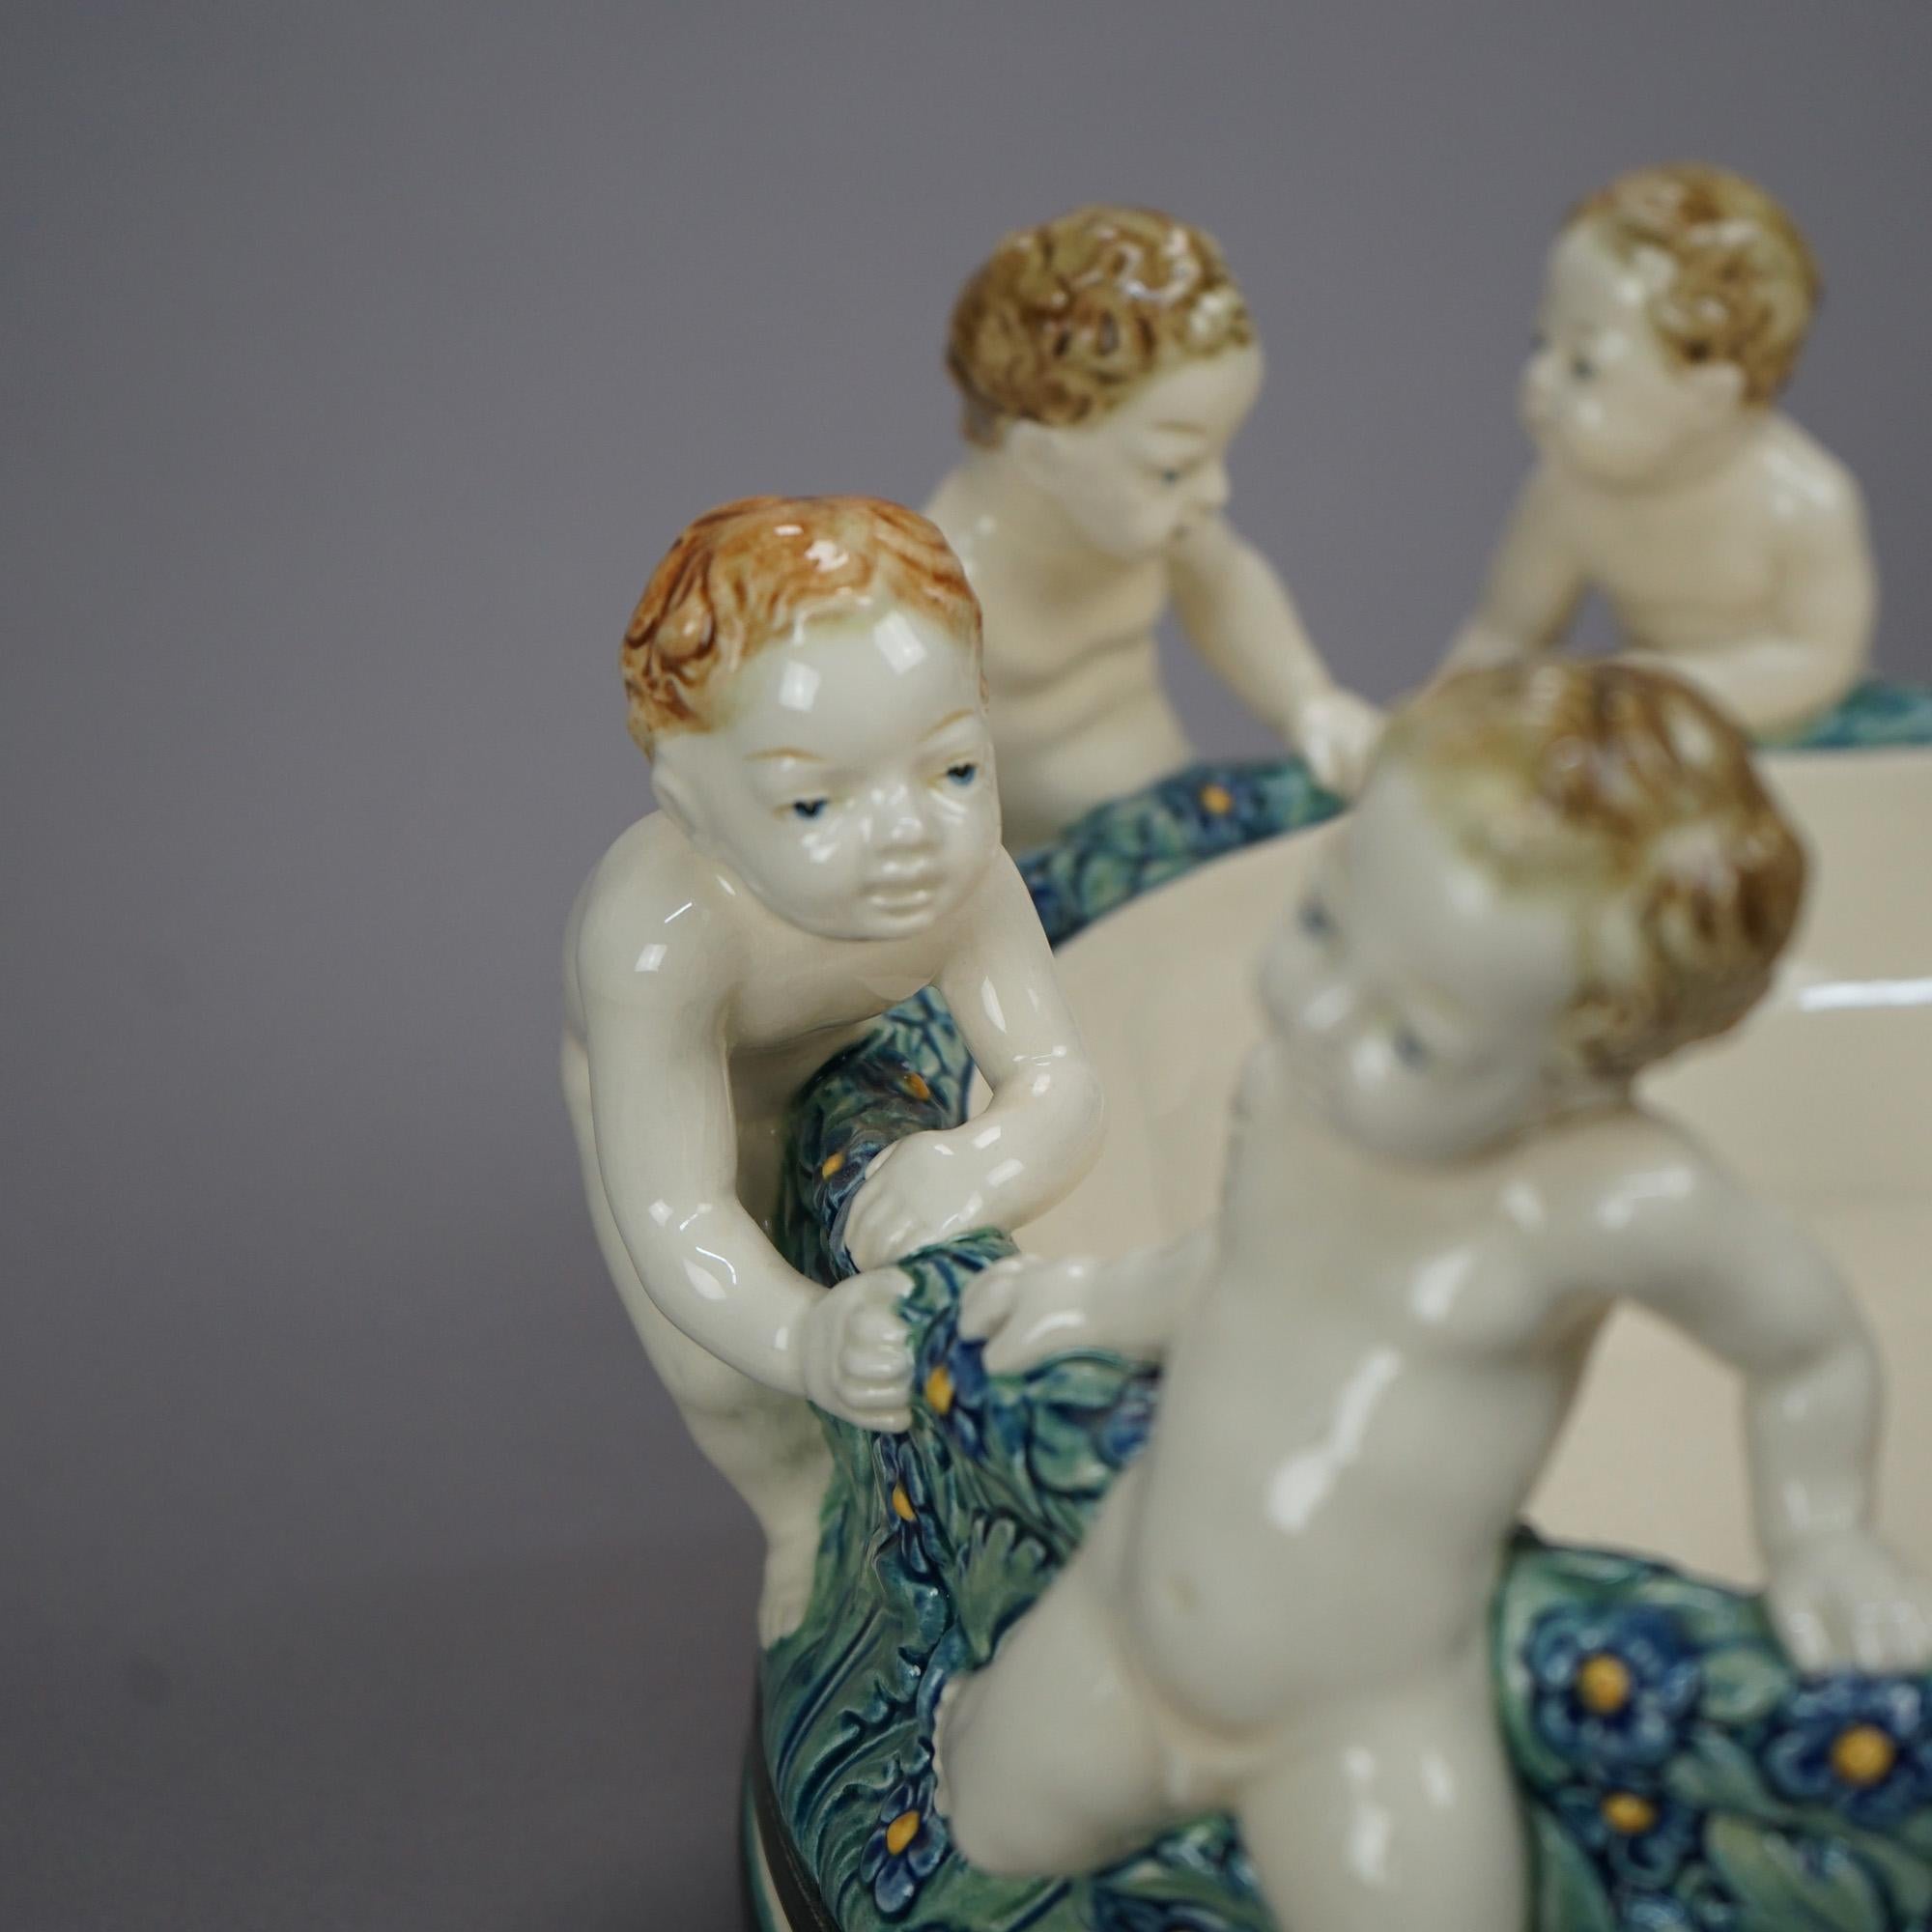 Glazed Antique Figural Wilhelm Majolica Pottery Center Bowl with Classical Putti, c1900